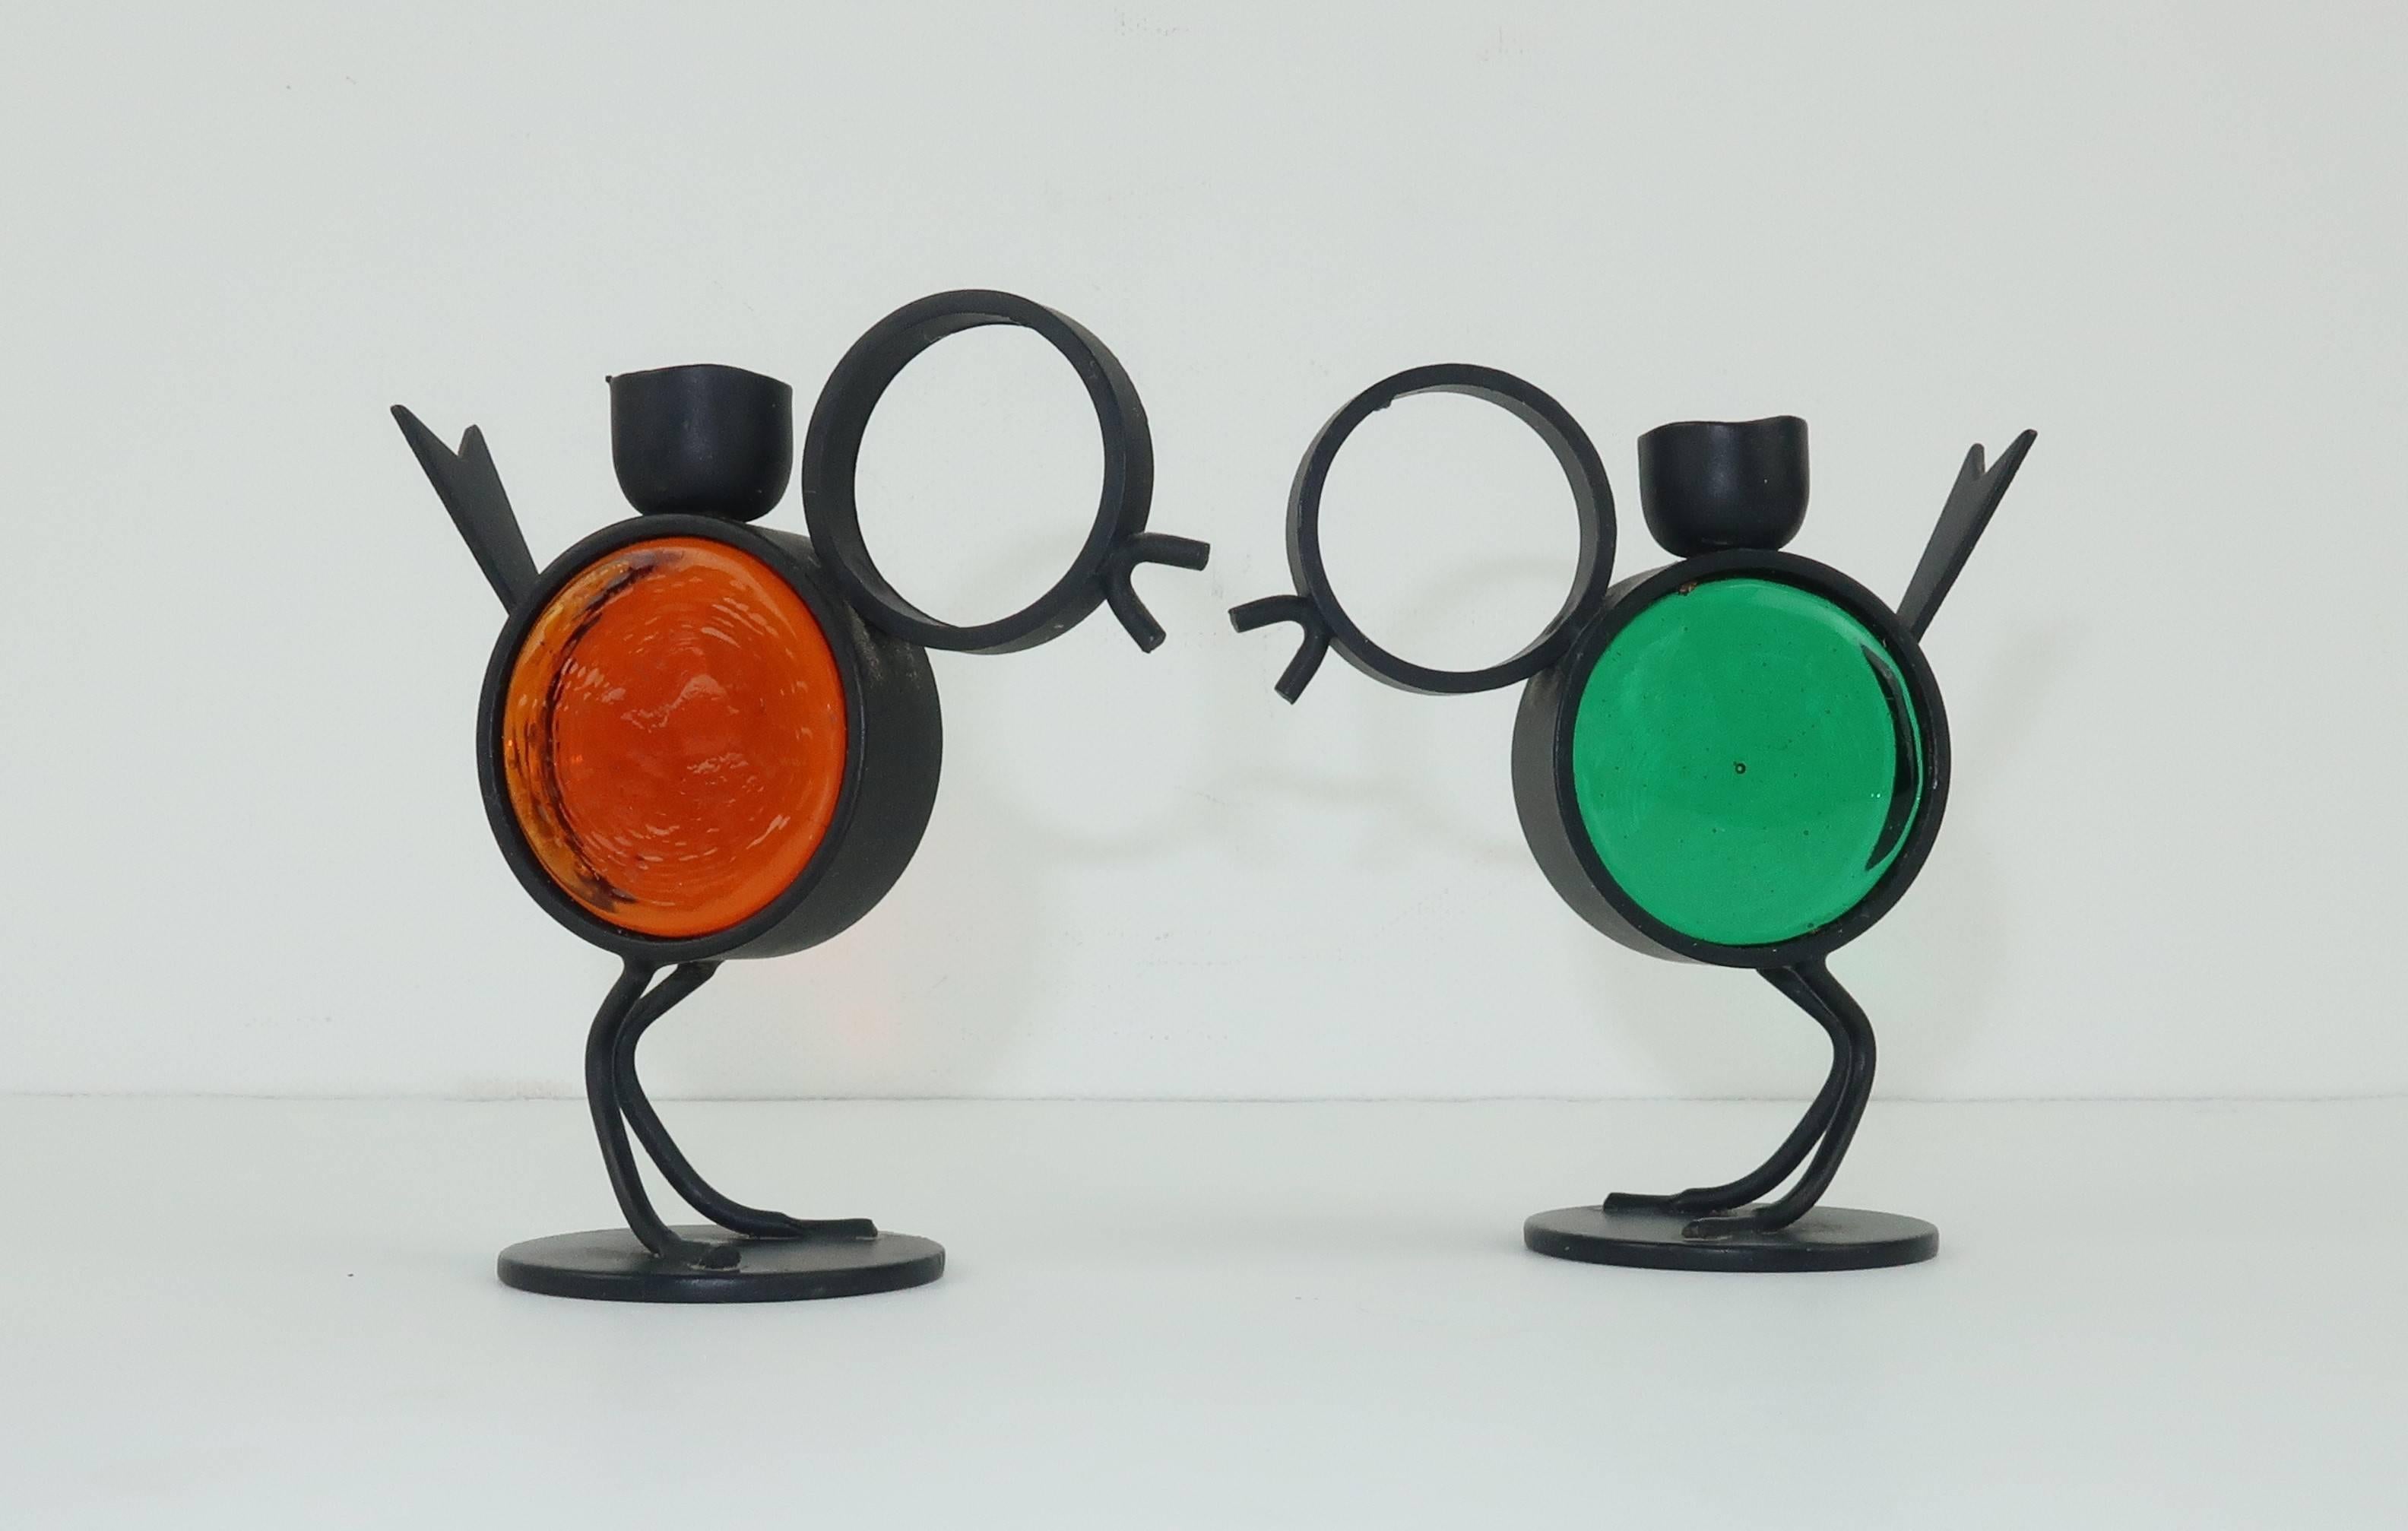 Sweet tweets!  These C.1960 diminutive iron and glass candle holders were designed by Gunnar Ander for Ystall Metall, a Swedish firm specializing in metal works.  The clever silhouette is functional and equally adorable as the birds are easily